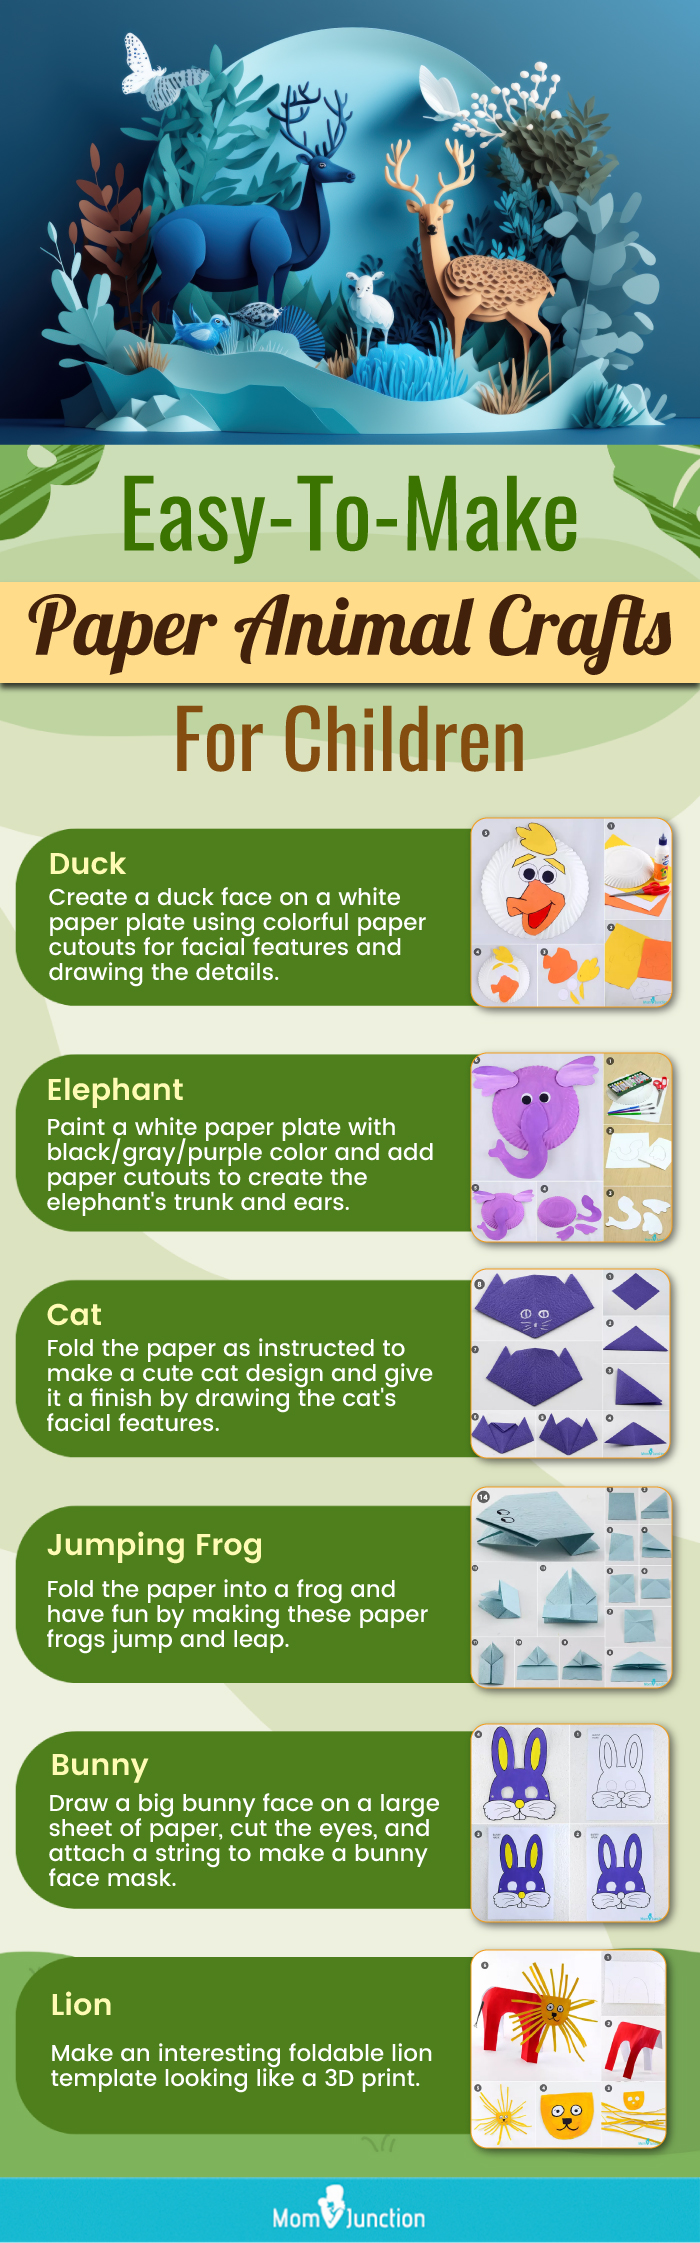 easy to make paper animal crafts for children (infographic)